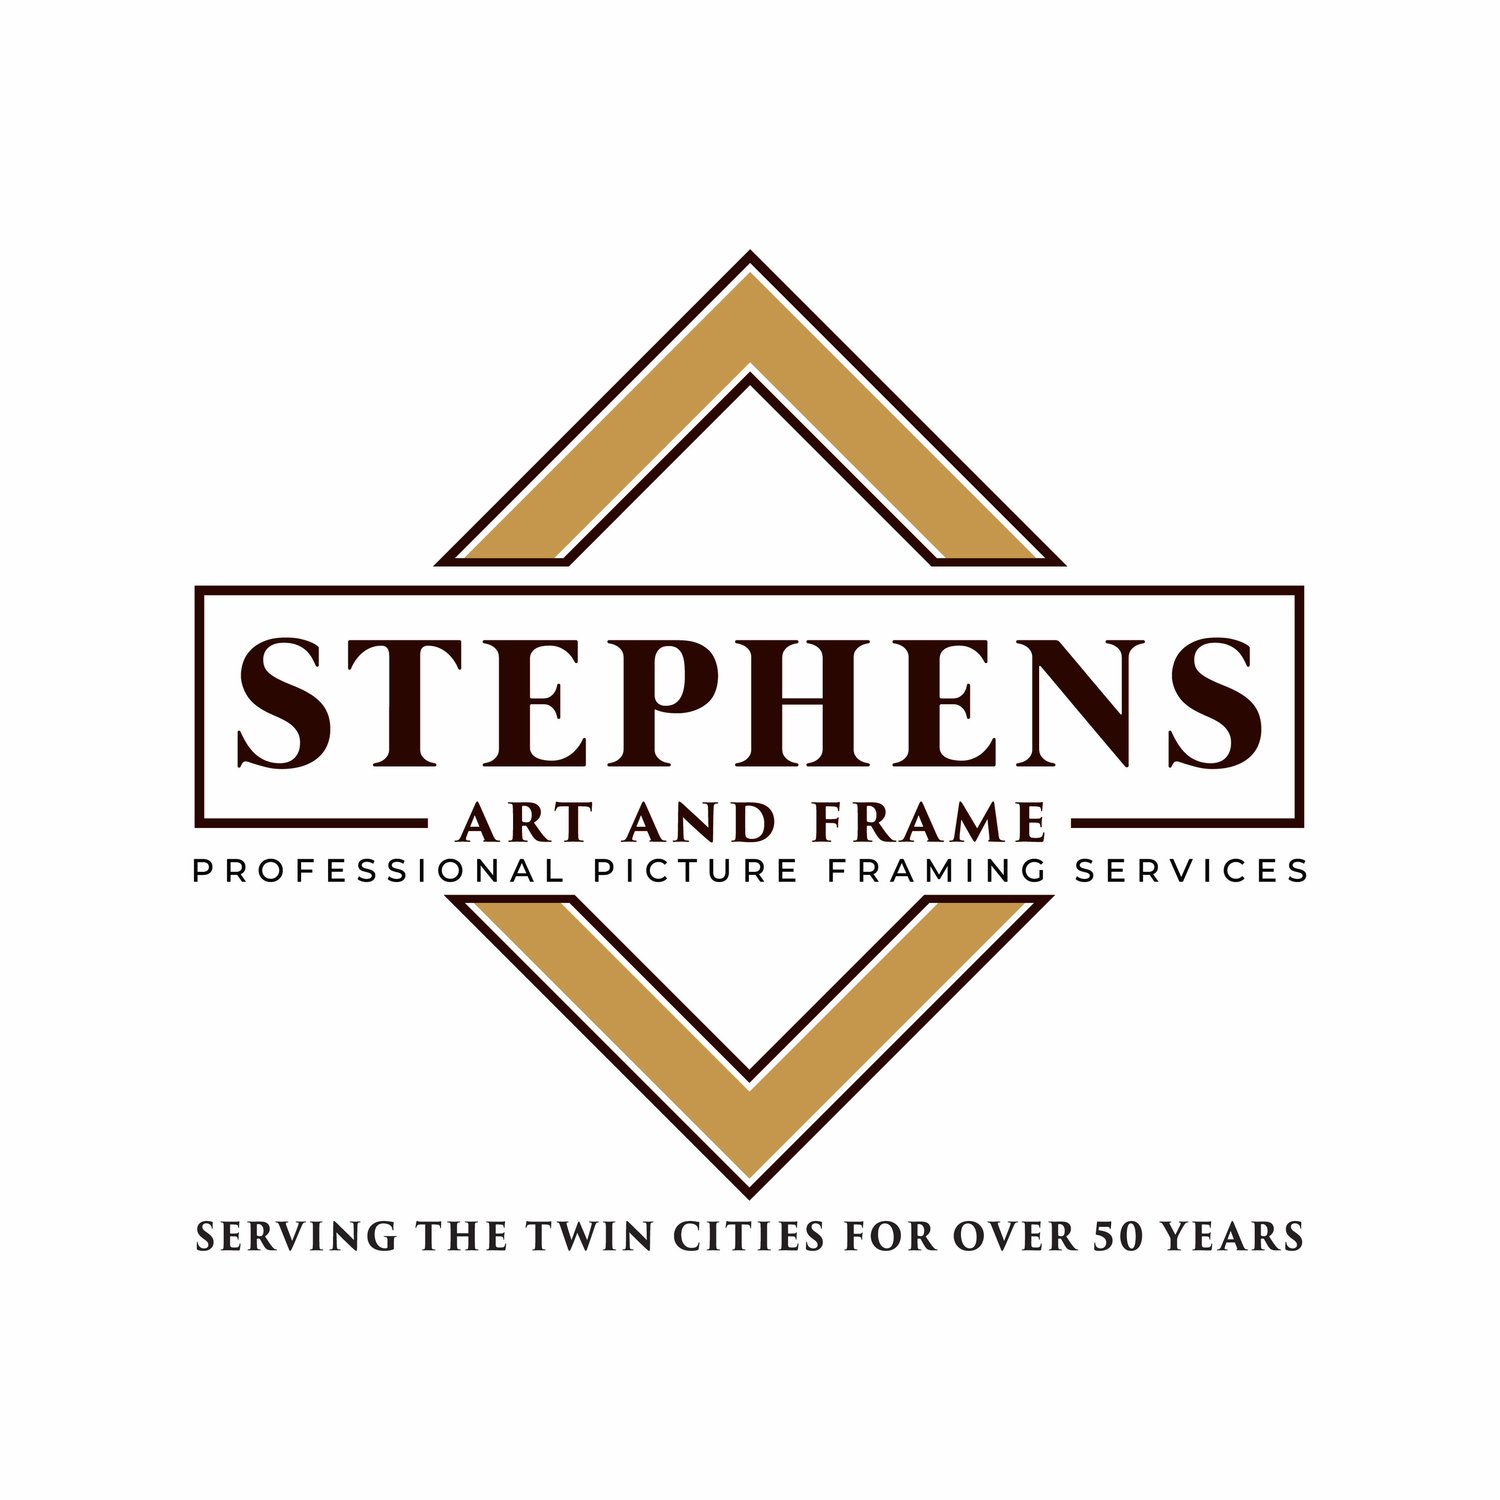 Stephens Art and Frame | Custom Picture Framing | Twin Cities